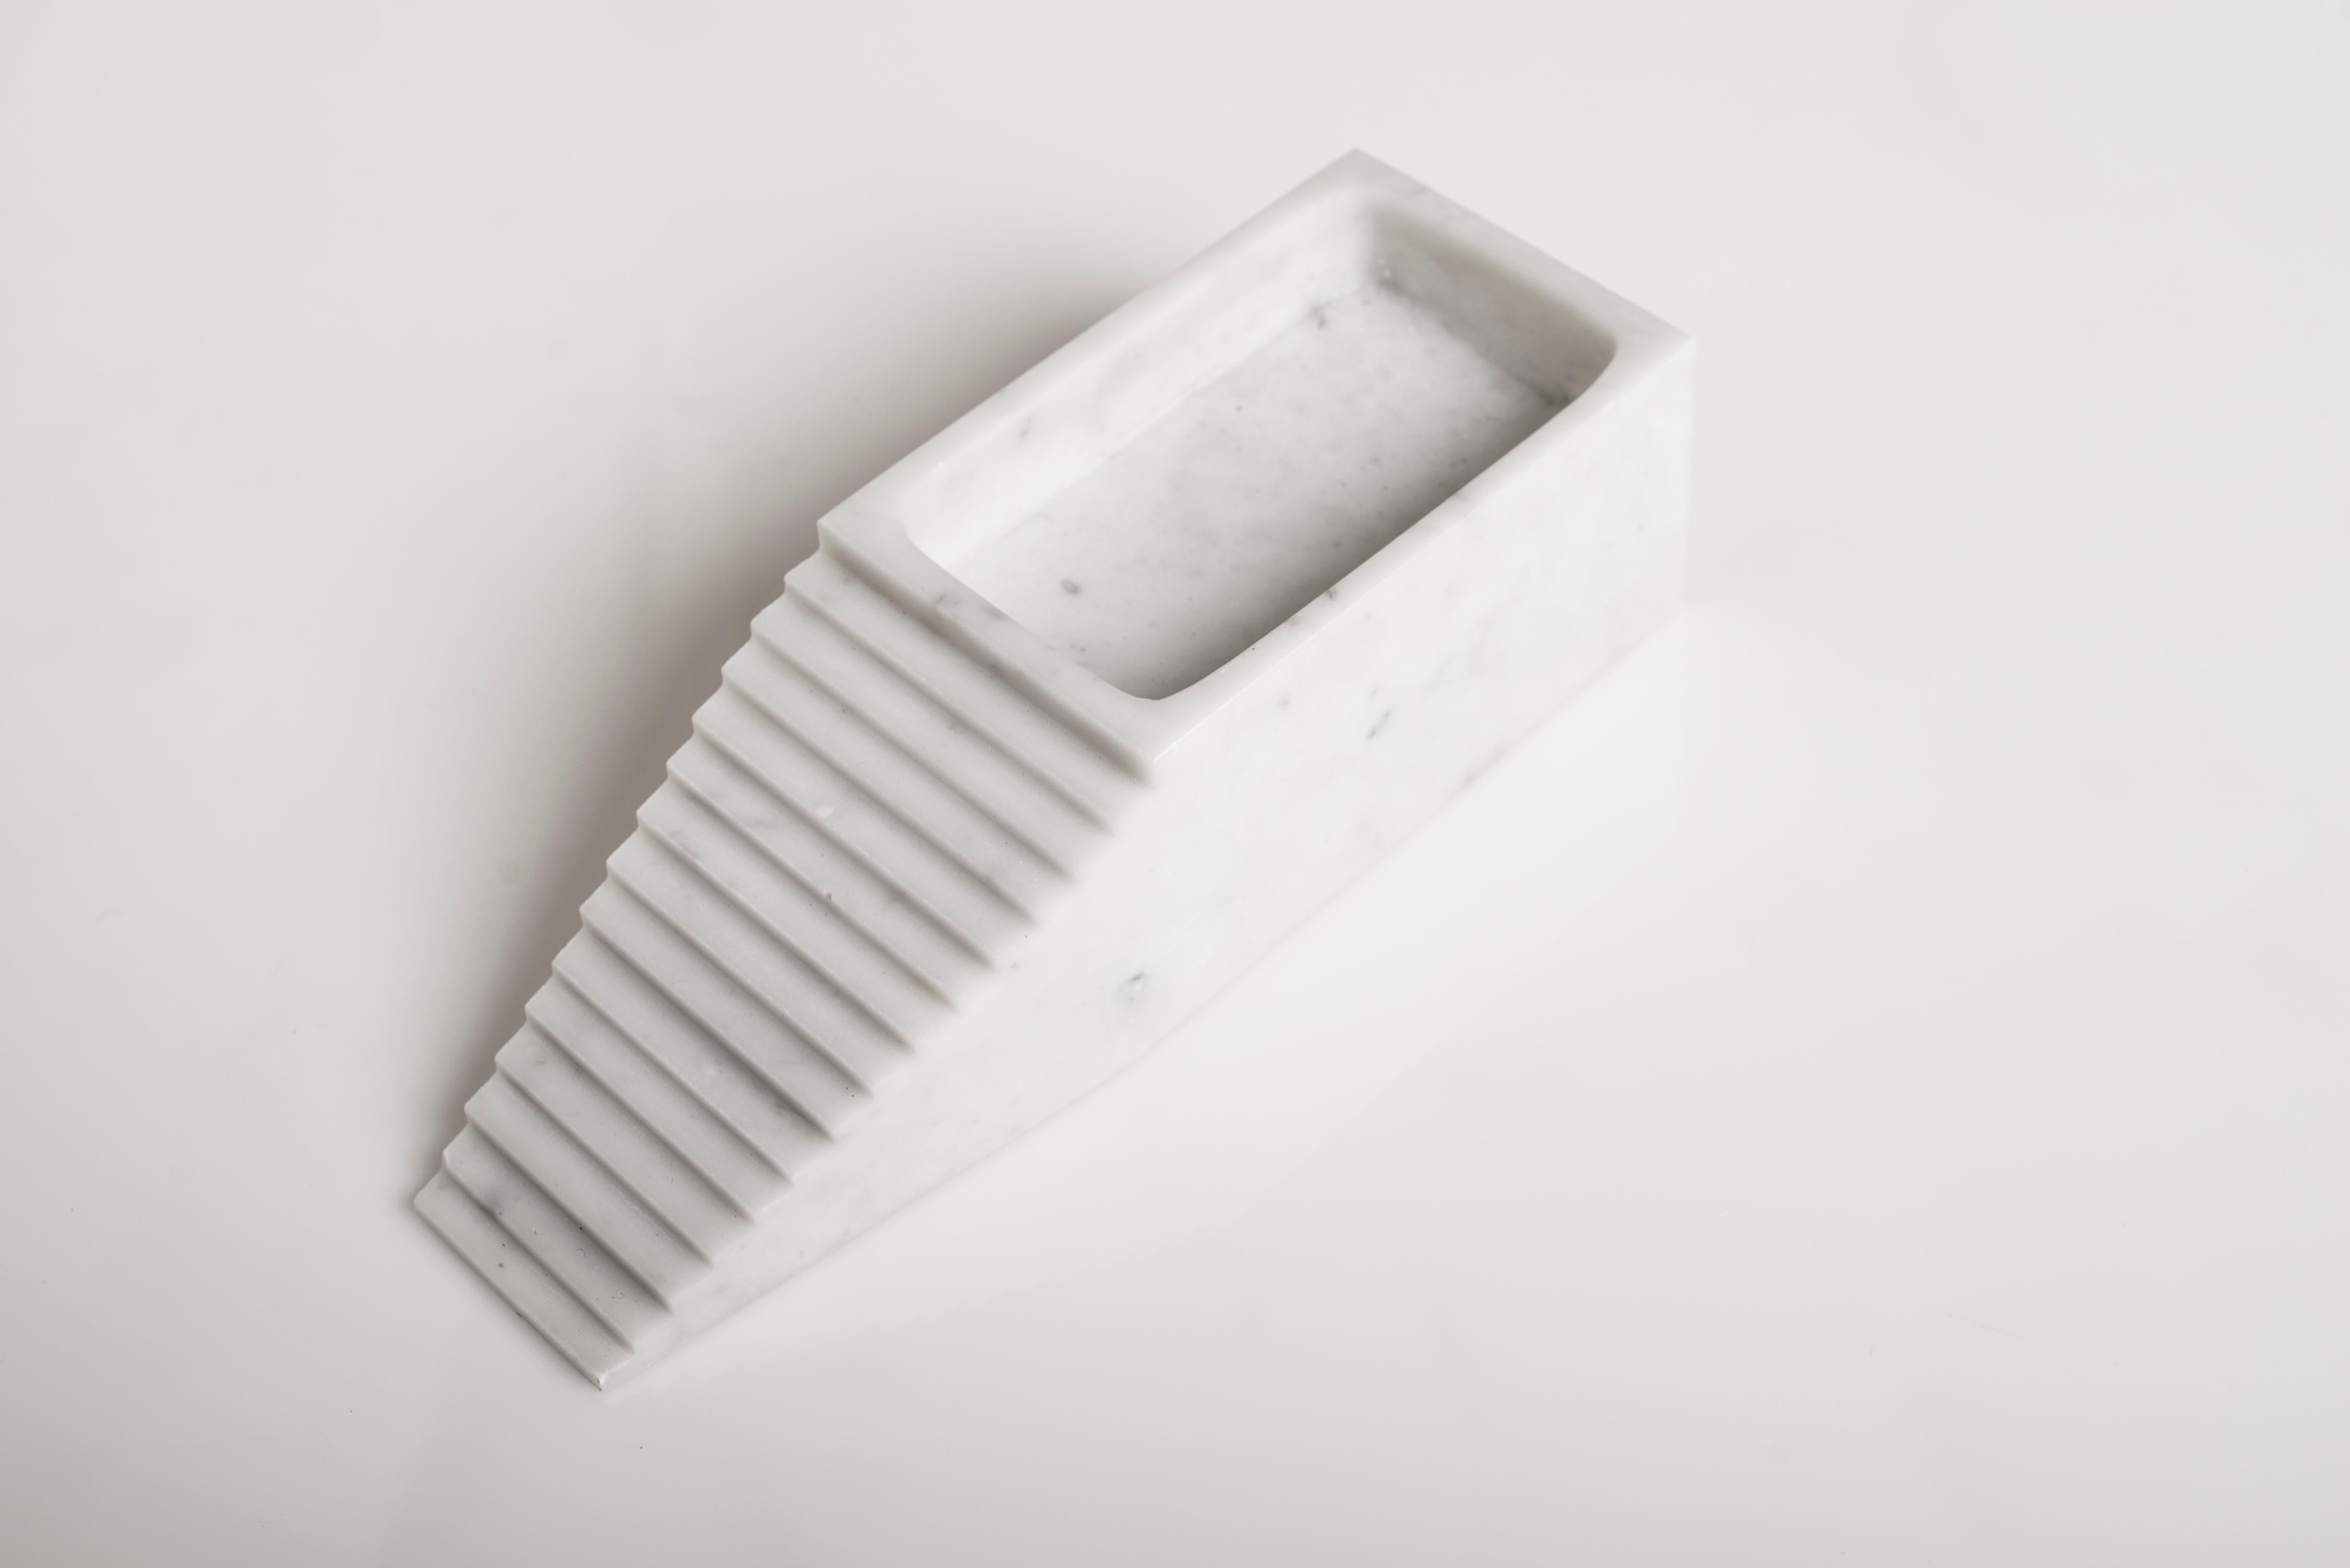 Capri sculpture by Carlo Massoud
Handmade 
Dimensions: D 30 x W 10 x H 7 cm 
Materials: carrara marble

Carlo Massoud’s work stems from his relentless questioning of social, political, cultural, and environmental norms. He often pushes his